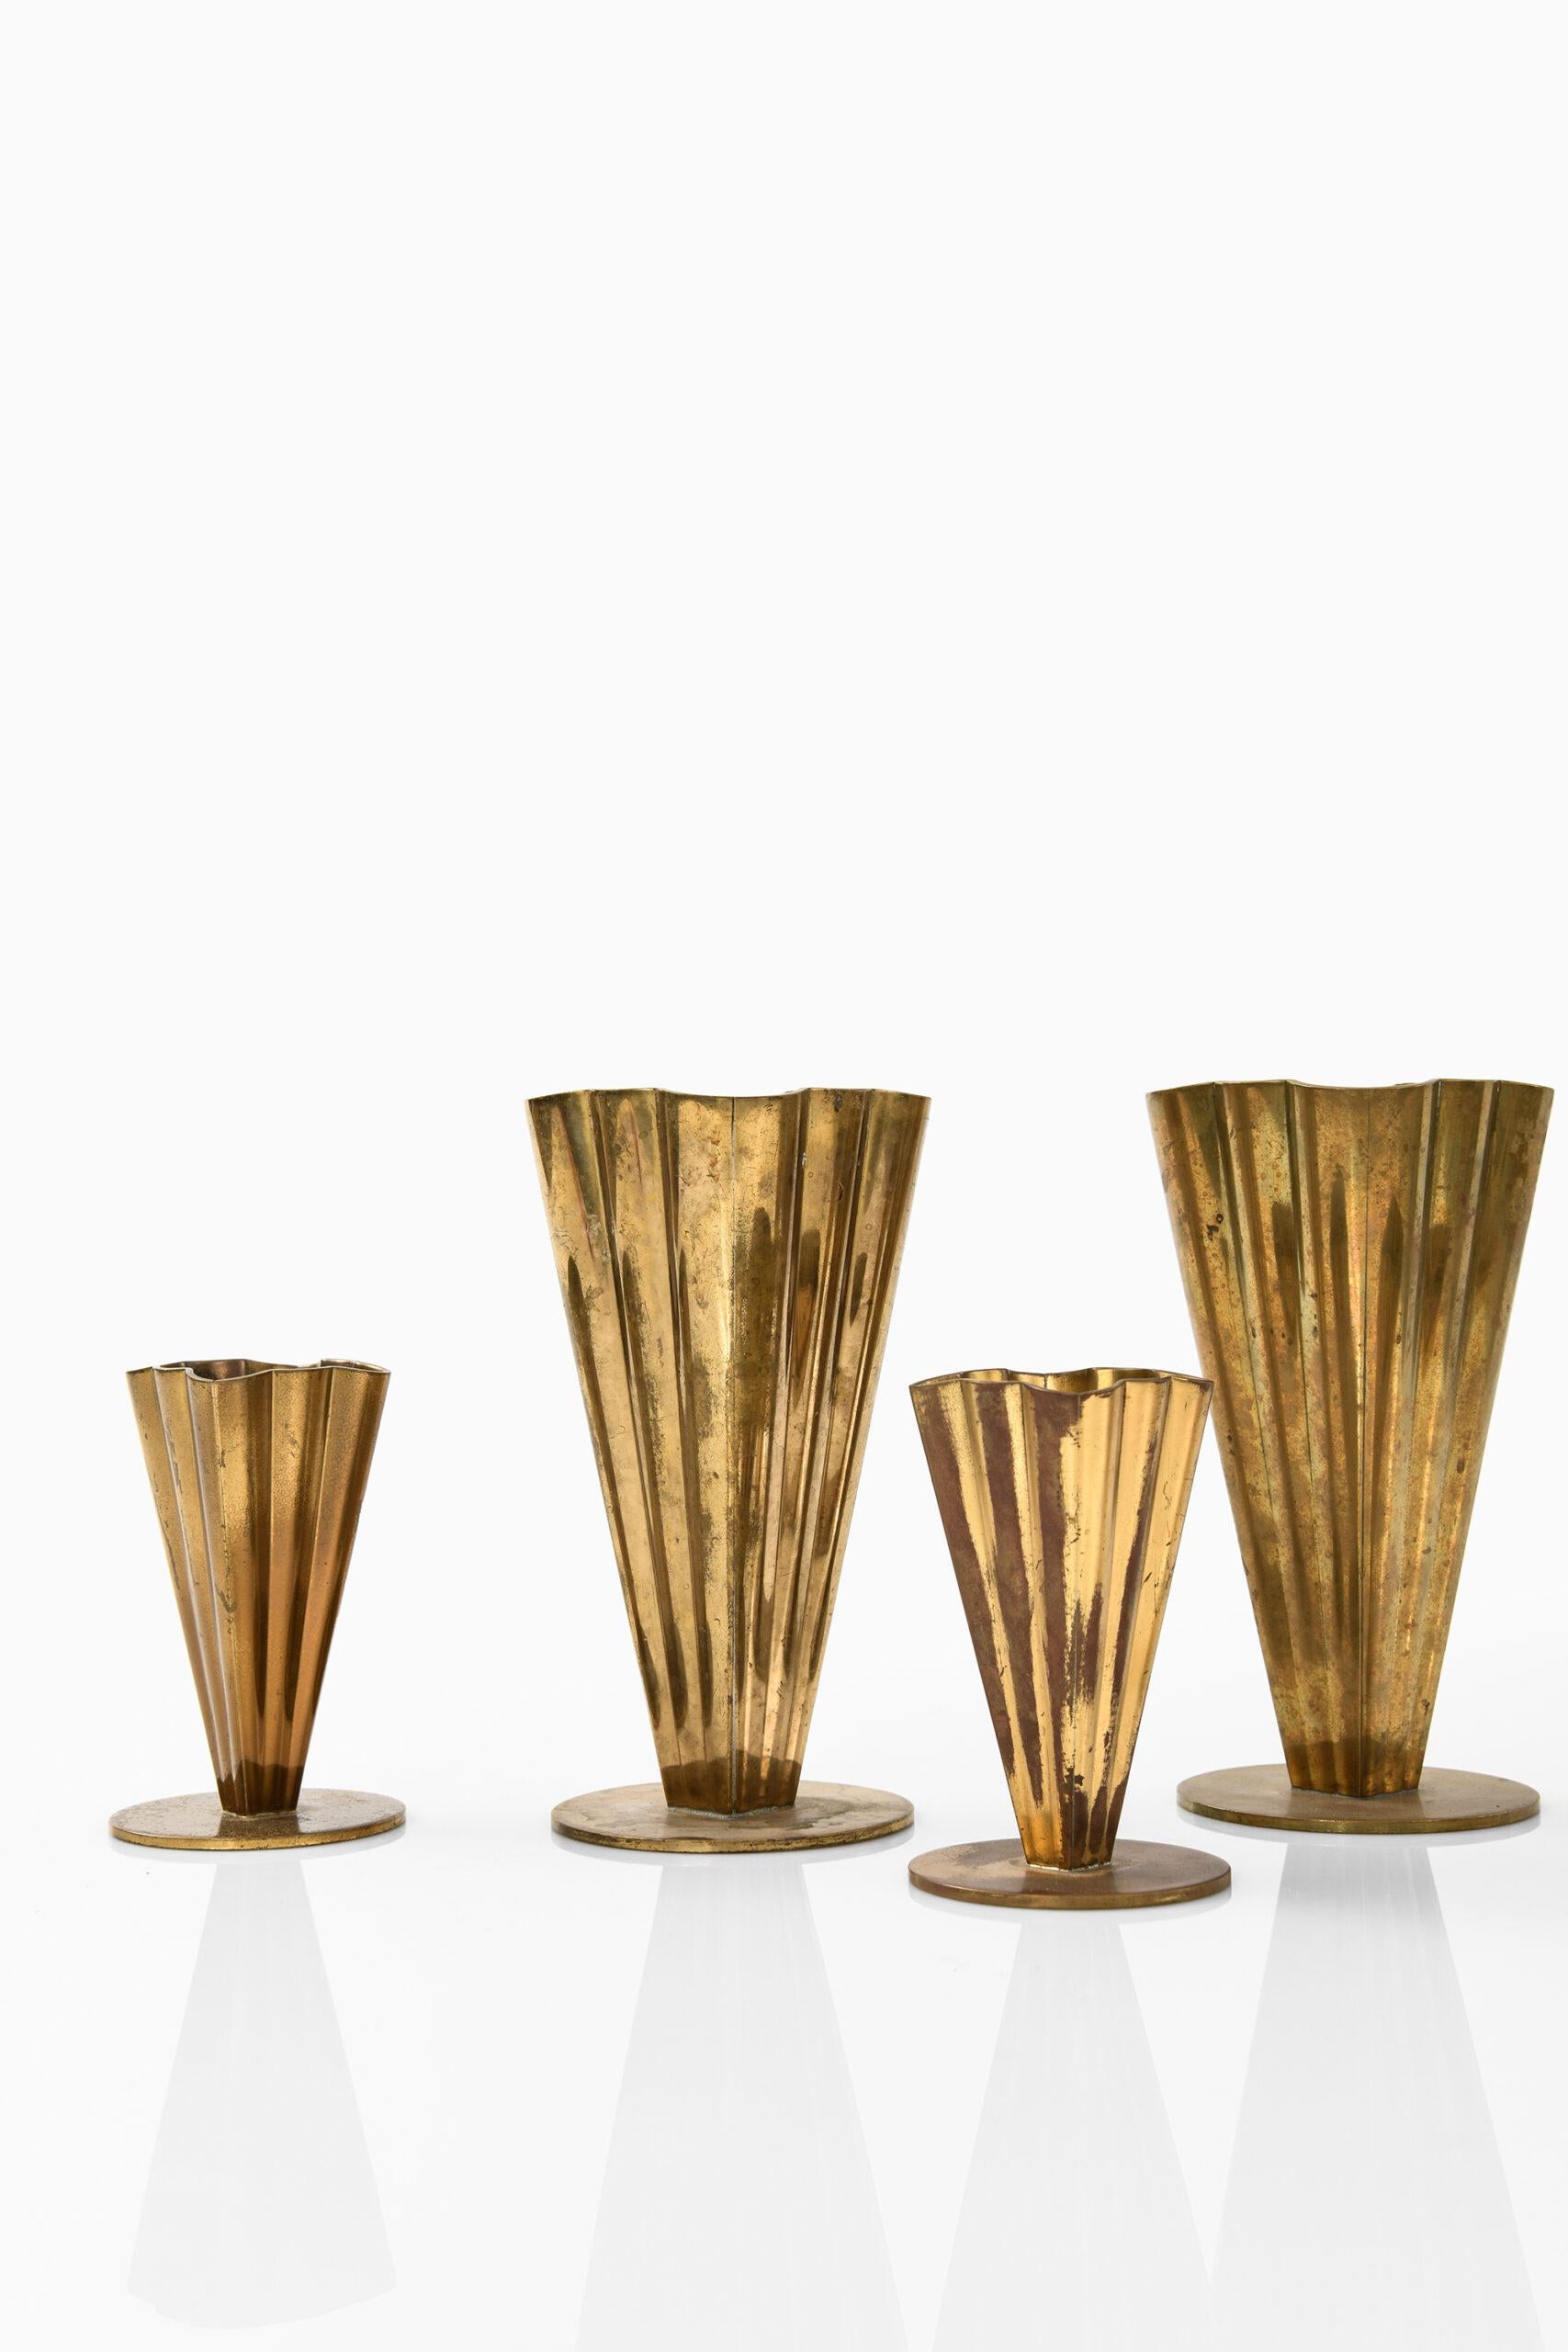 Set of 5 Art Deco vases designed by Gunnar Ander. Produced by Ystad Metall in Sweden.